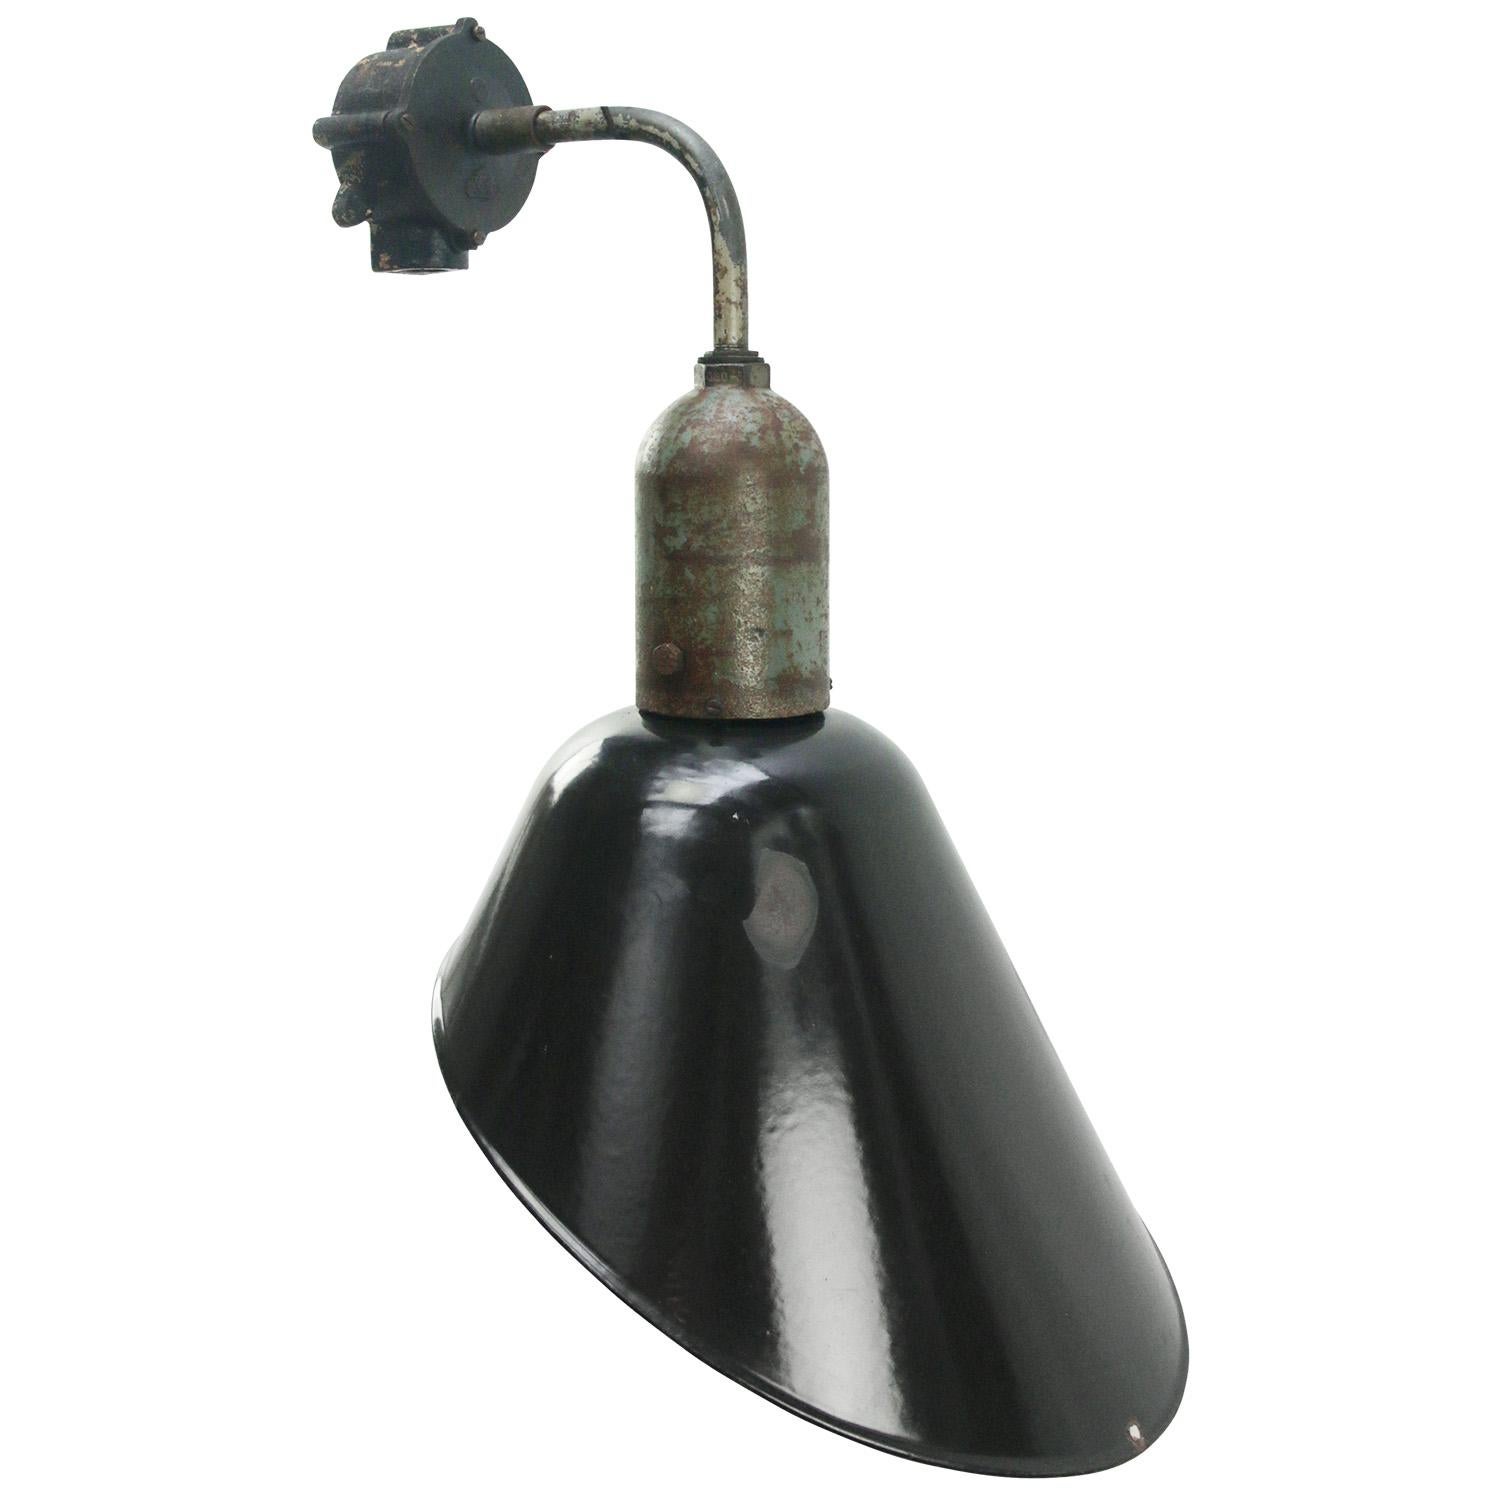 Factory wall light.
Black enamel, white interior.

Measures: diameter cast iron wall piece: 10.5 cm, 2 holes to secure.

Weight: 3.20 kg / 7.1 lb

Priced per individual item. All lamps have been made suitable by international standards for